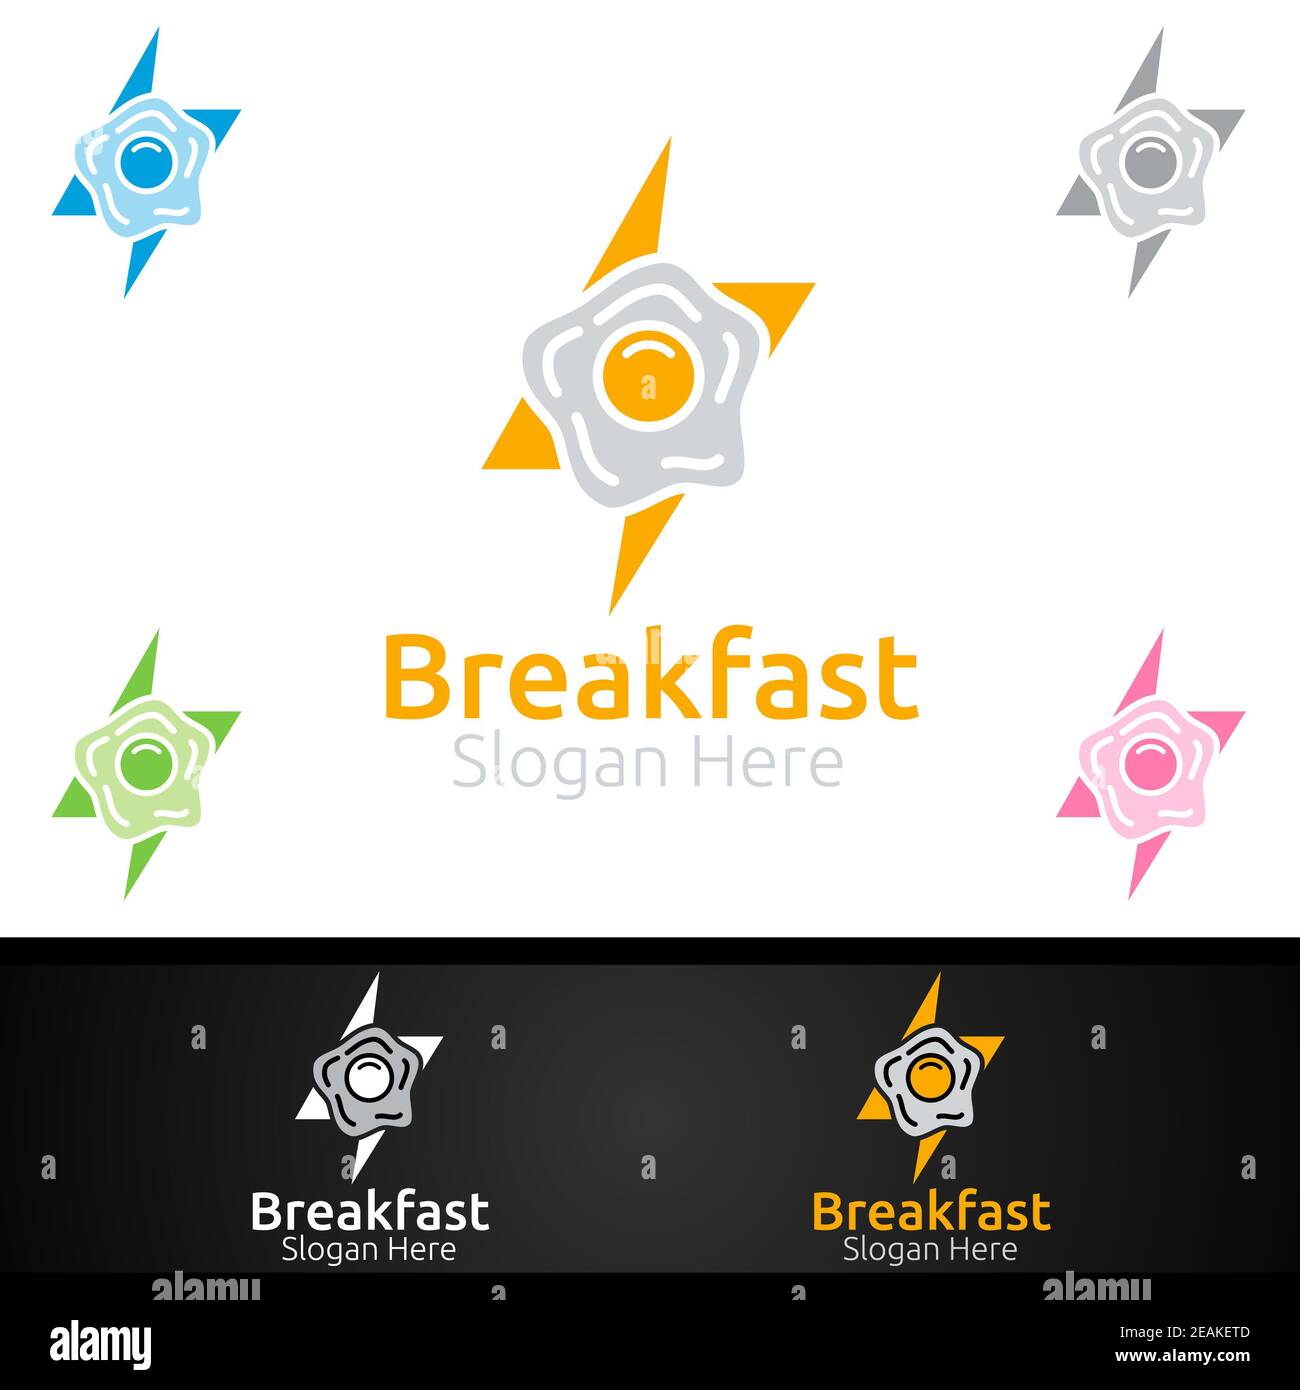 Fast Food Breakfast Delivery Service Logo for Restaurant, Cafe or Online Catering Delivery Stock Photo